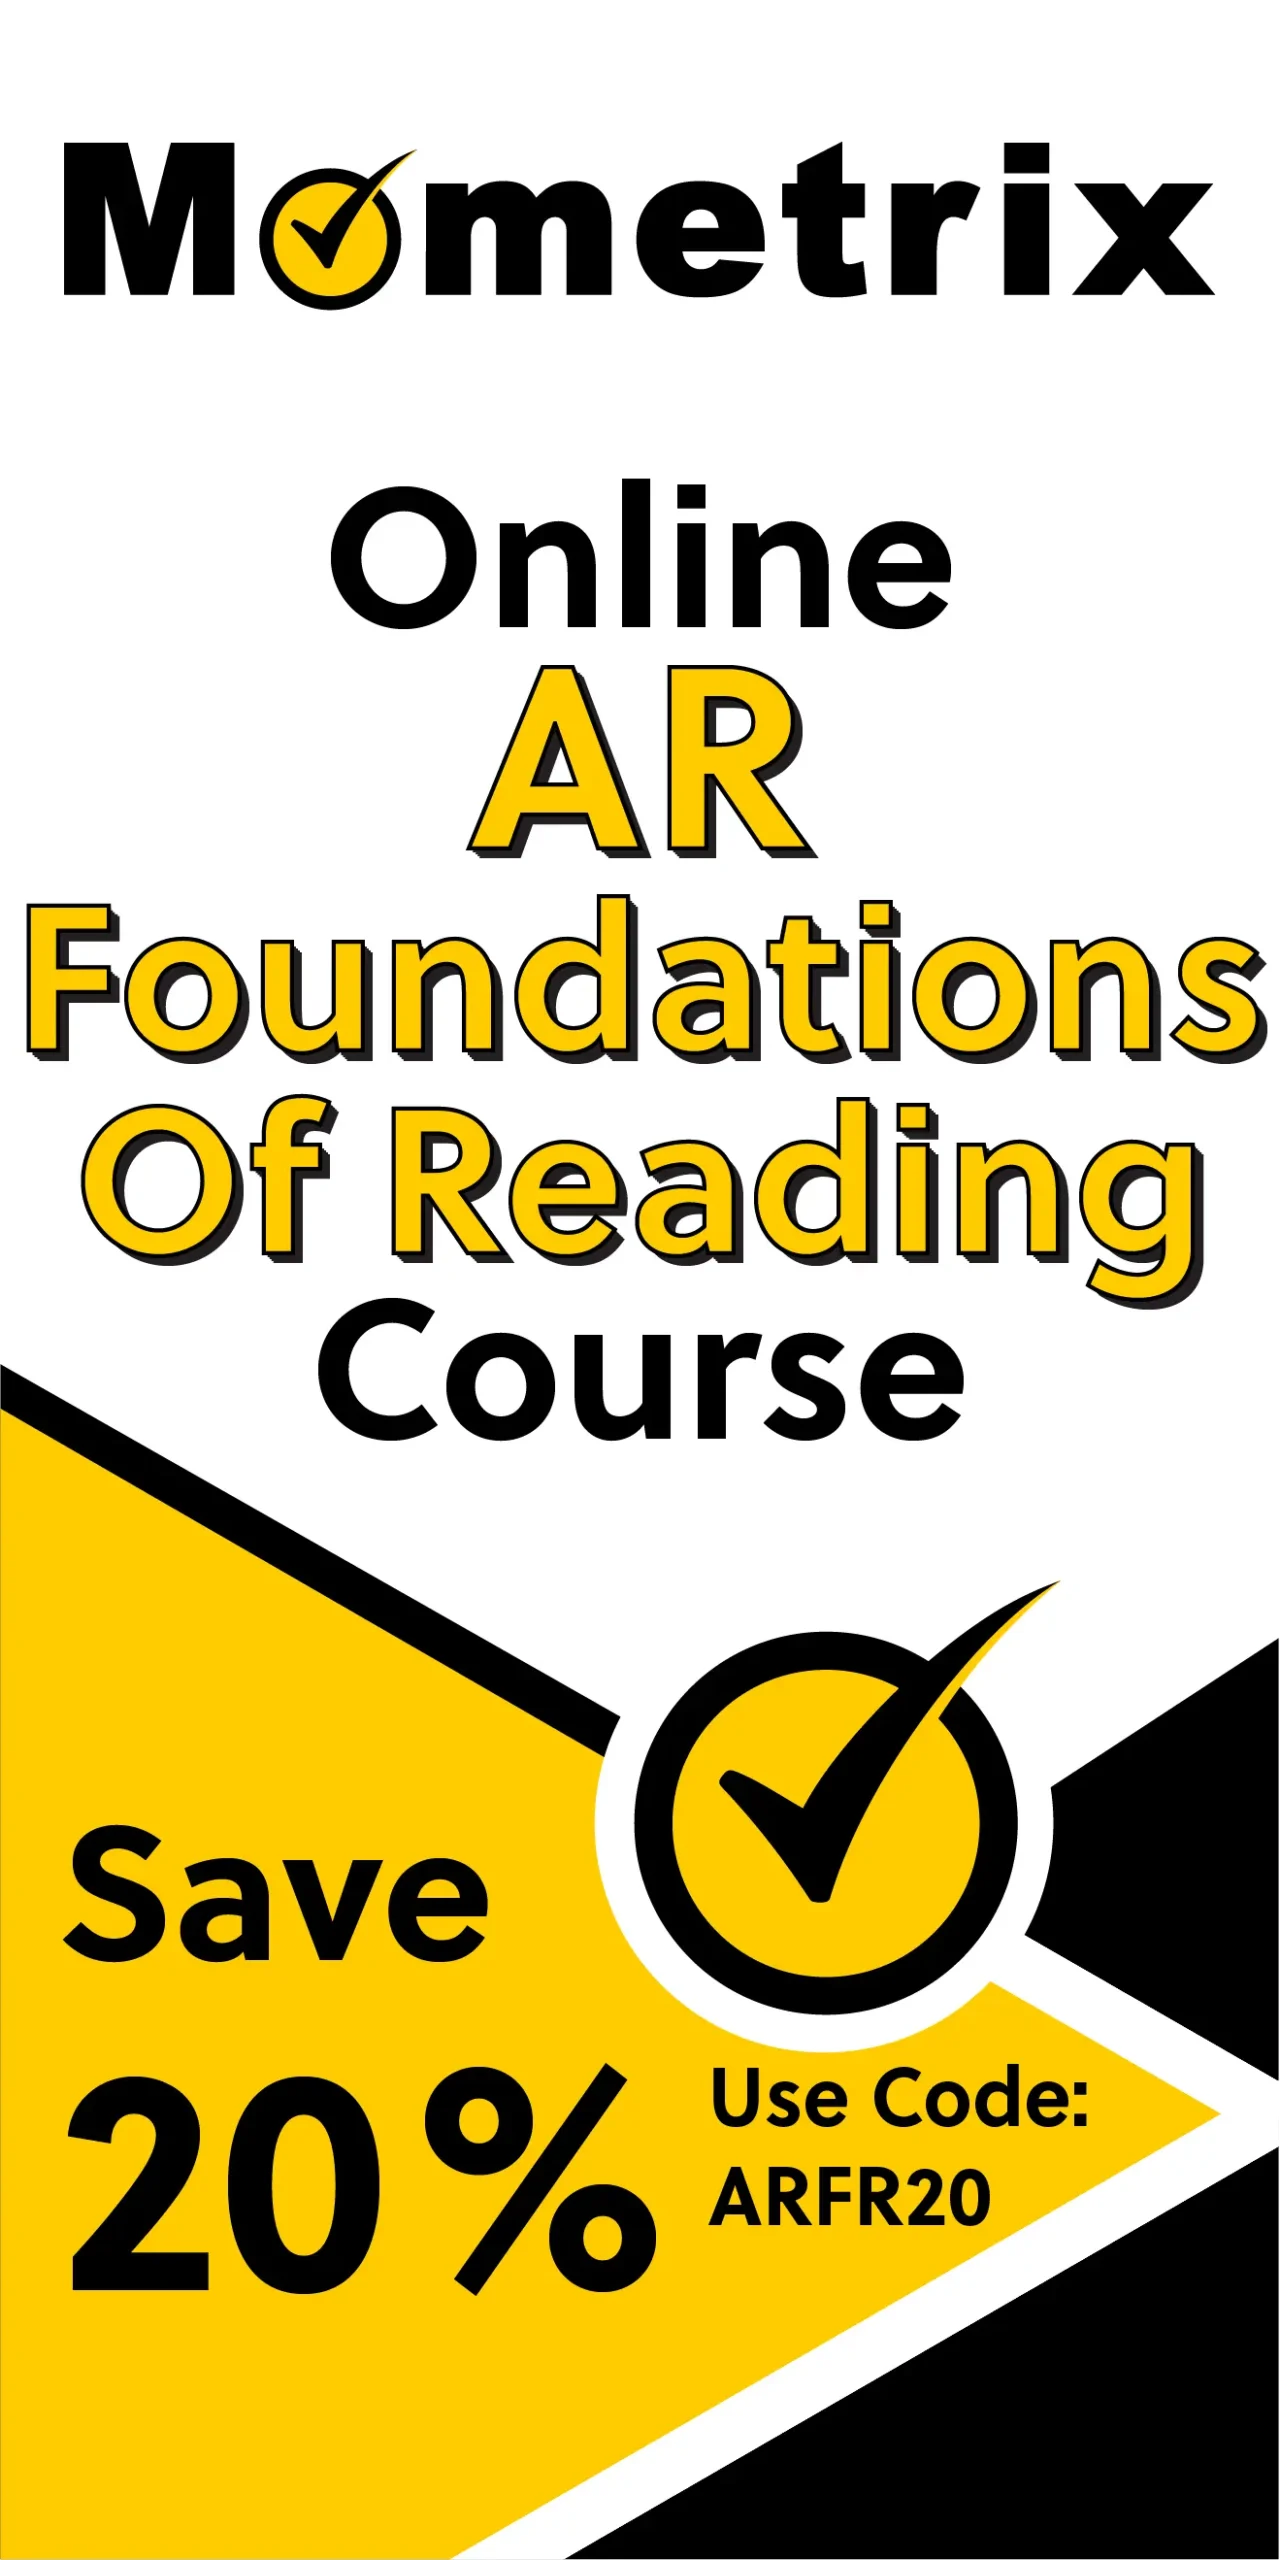 Click here for 20% off of Mometrix ACT online course. Use code: ARFR20